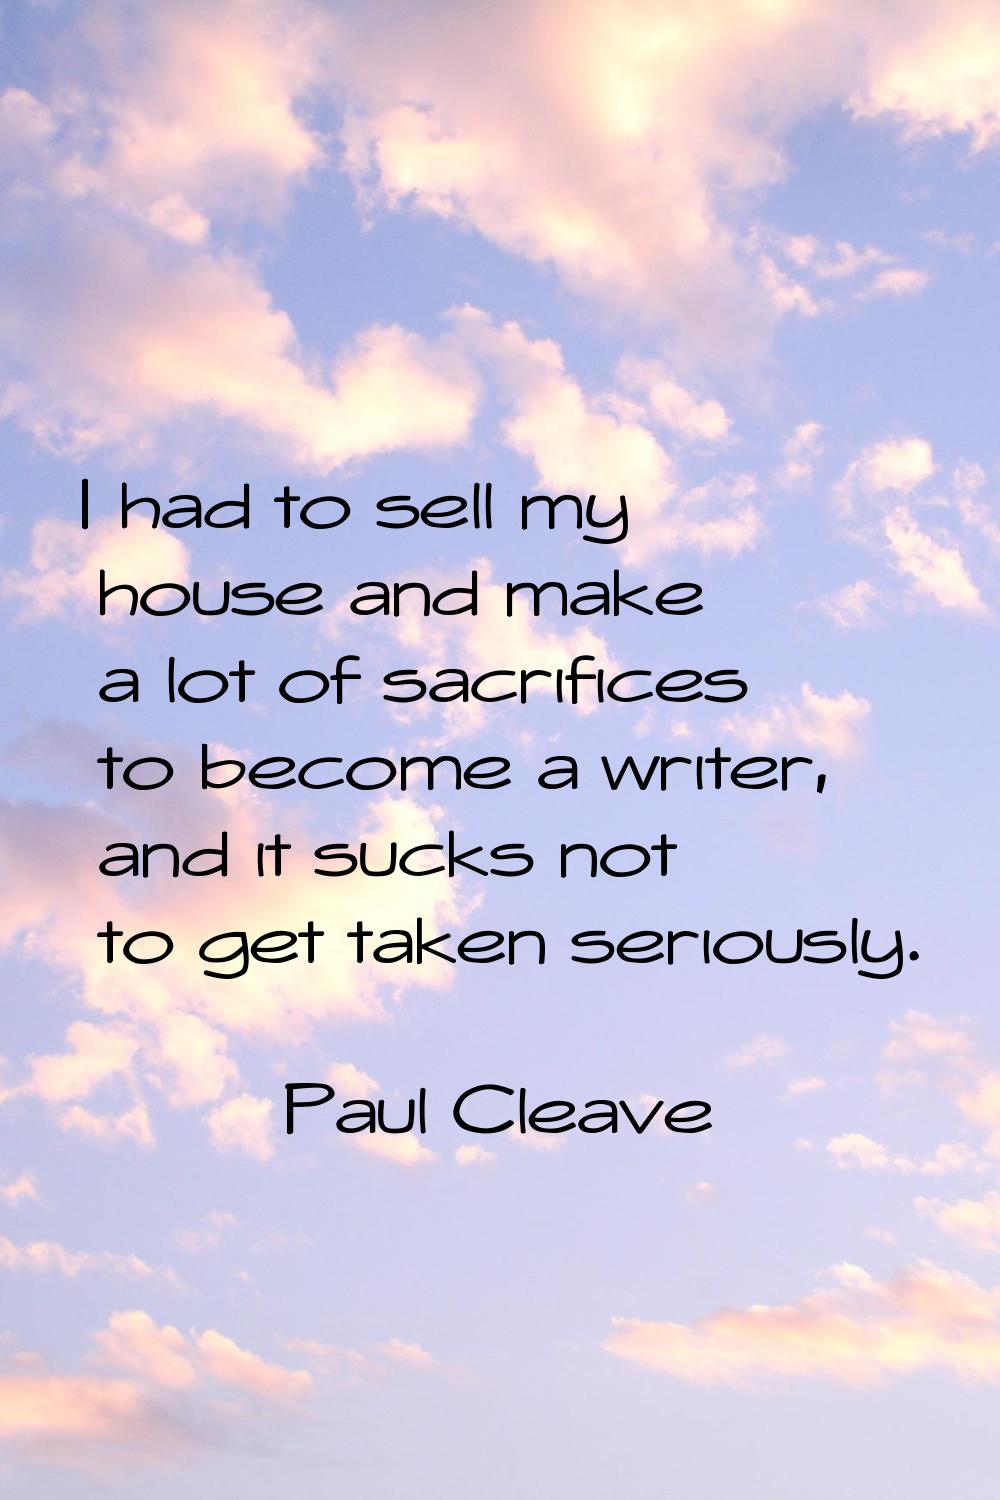 I had to sell my house and make a lot of sacrifices to become a writer, and it sucks not to get tak